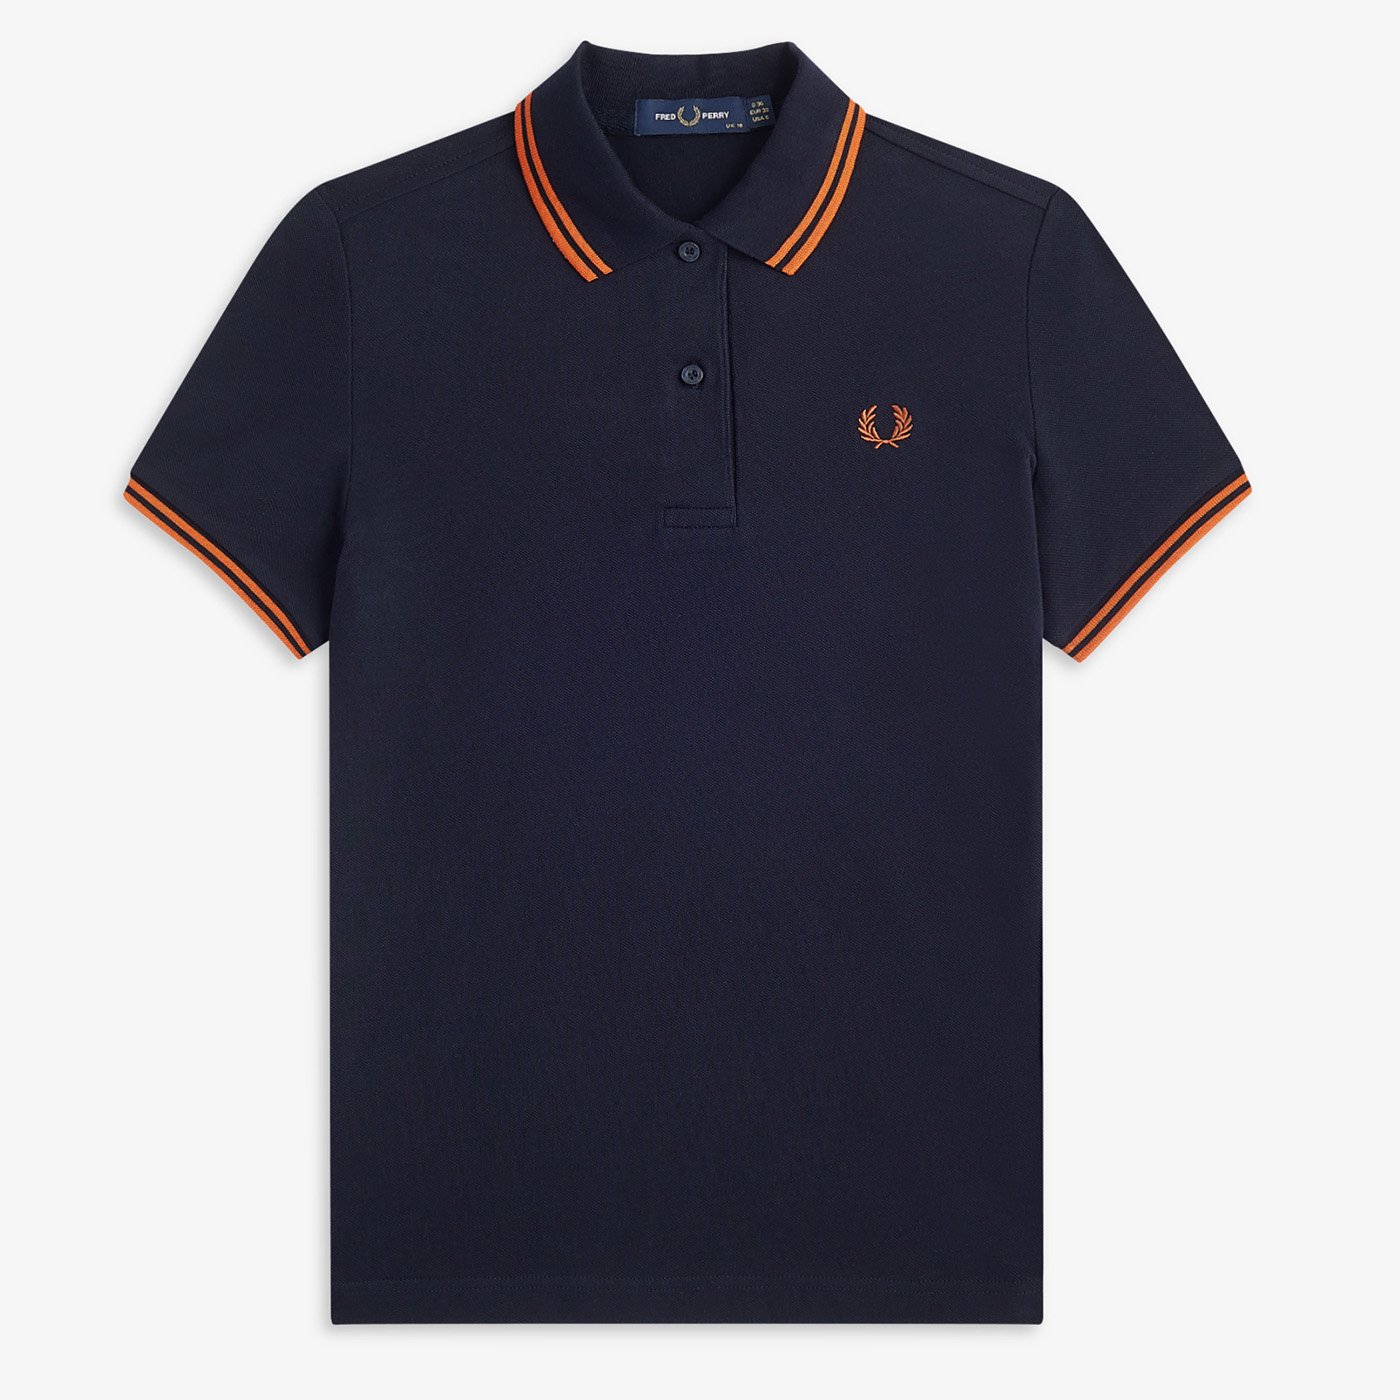 Fred Perry - W' TWIN TIPPED POLO SHIRT - Navy/Adobe